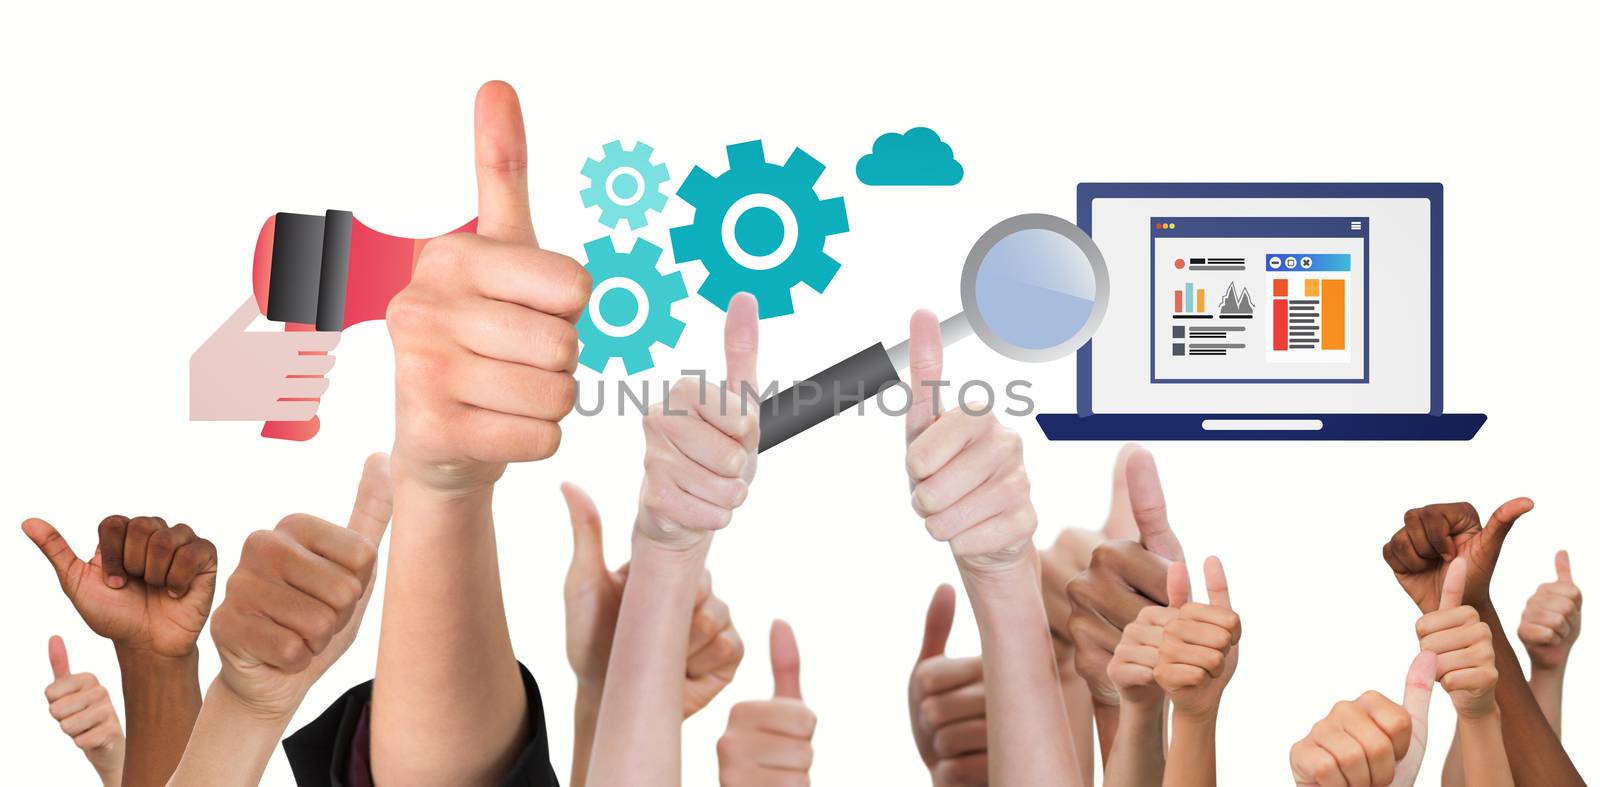 Hands showing thumbs up against business graphics